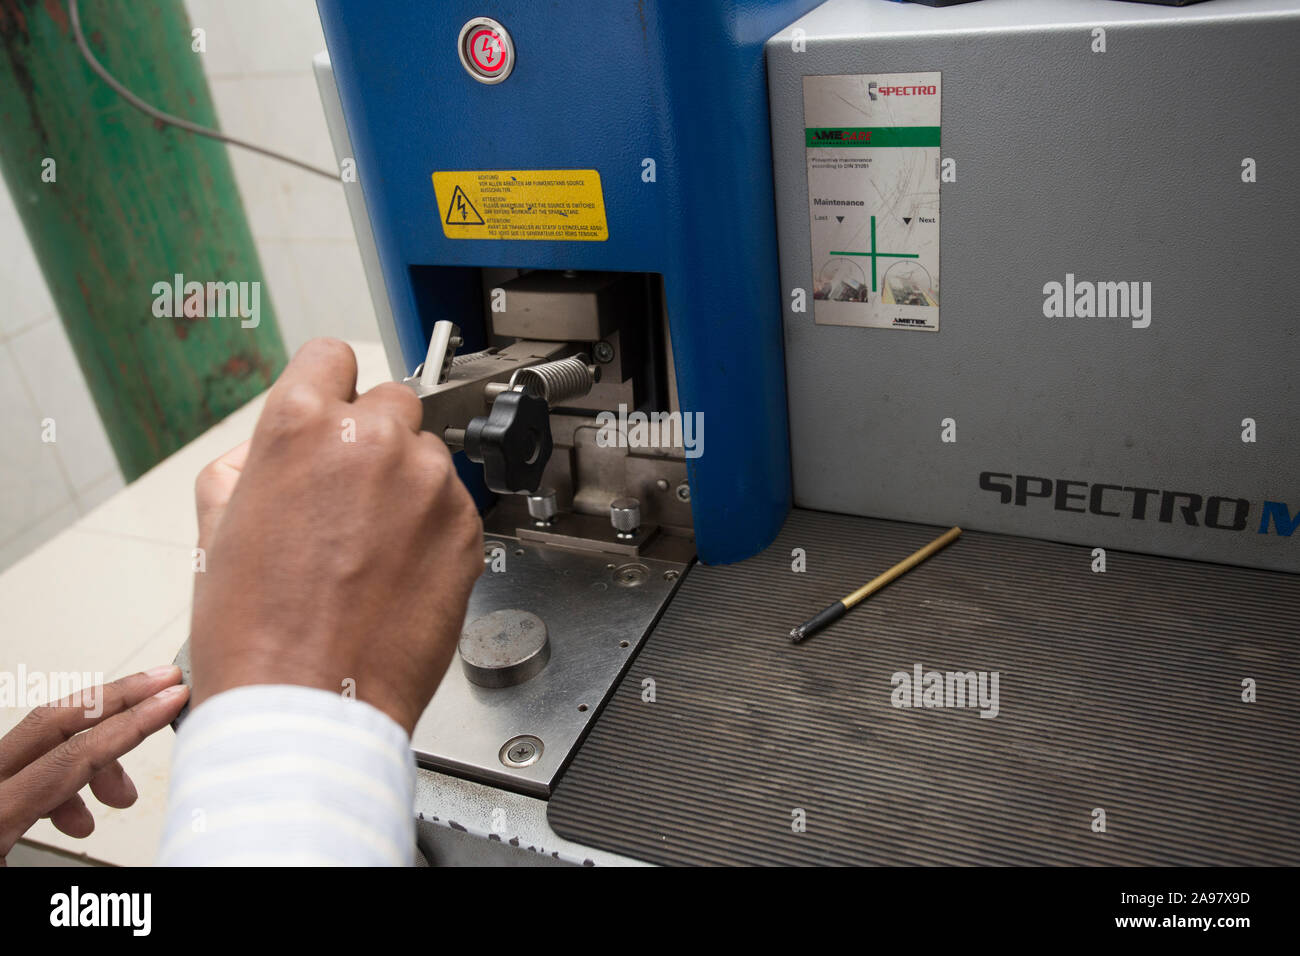 Spectrometers For Ultimate Performance in Metal Analysis 10000th SPECTROMAXx Device. Stock Photo